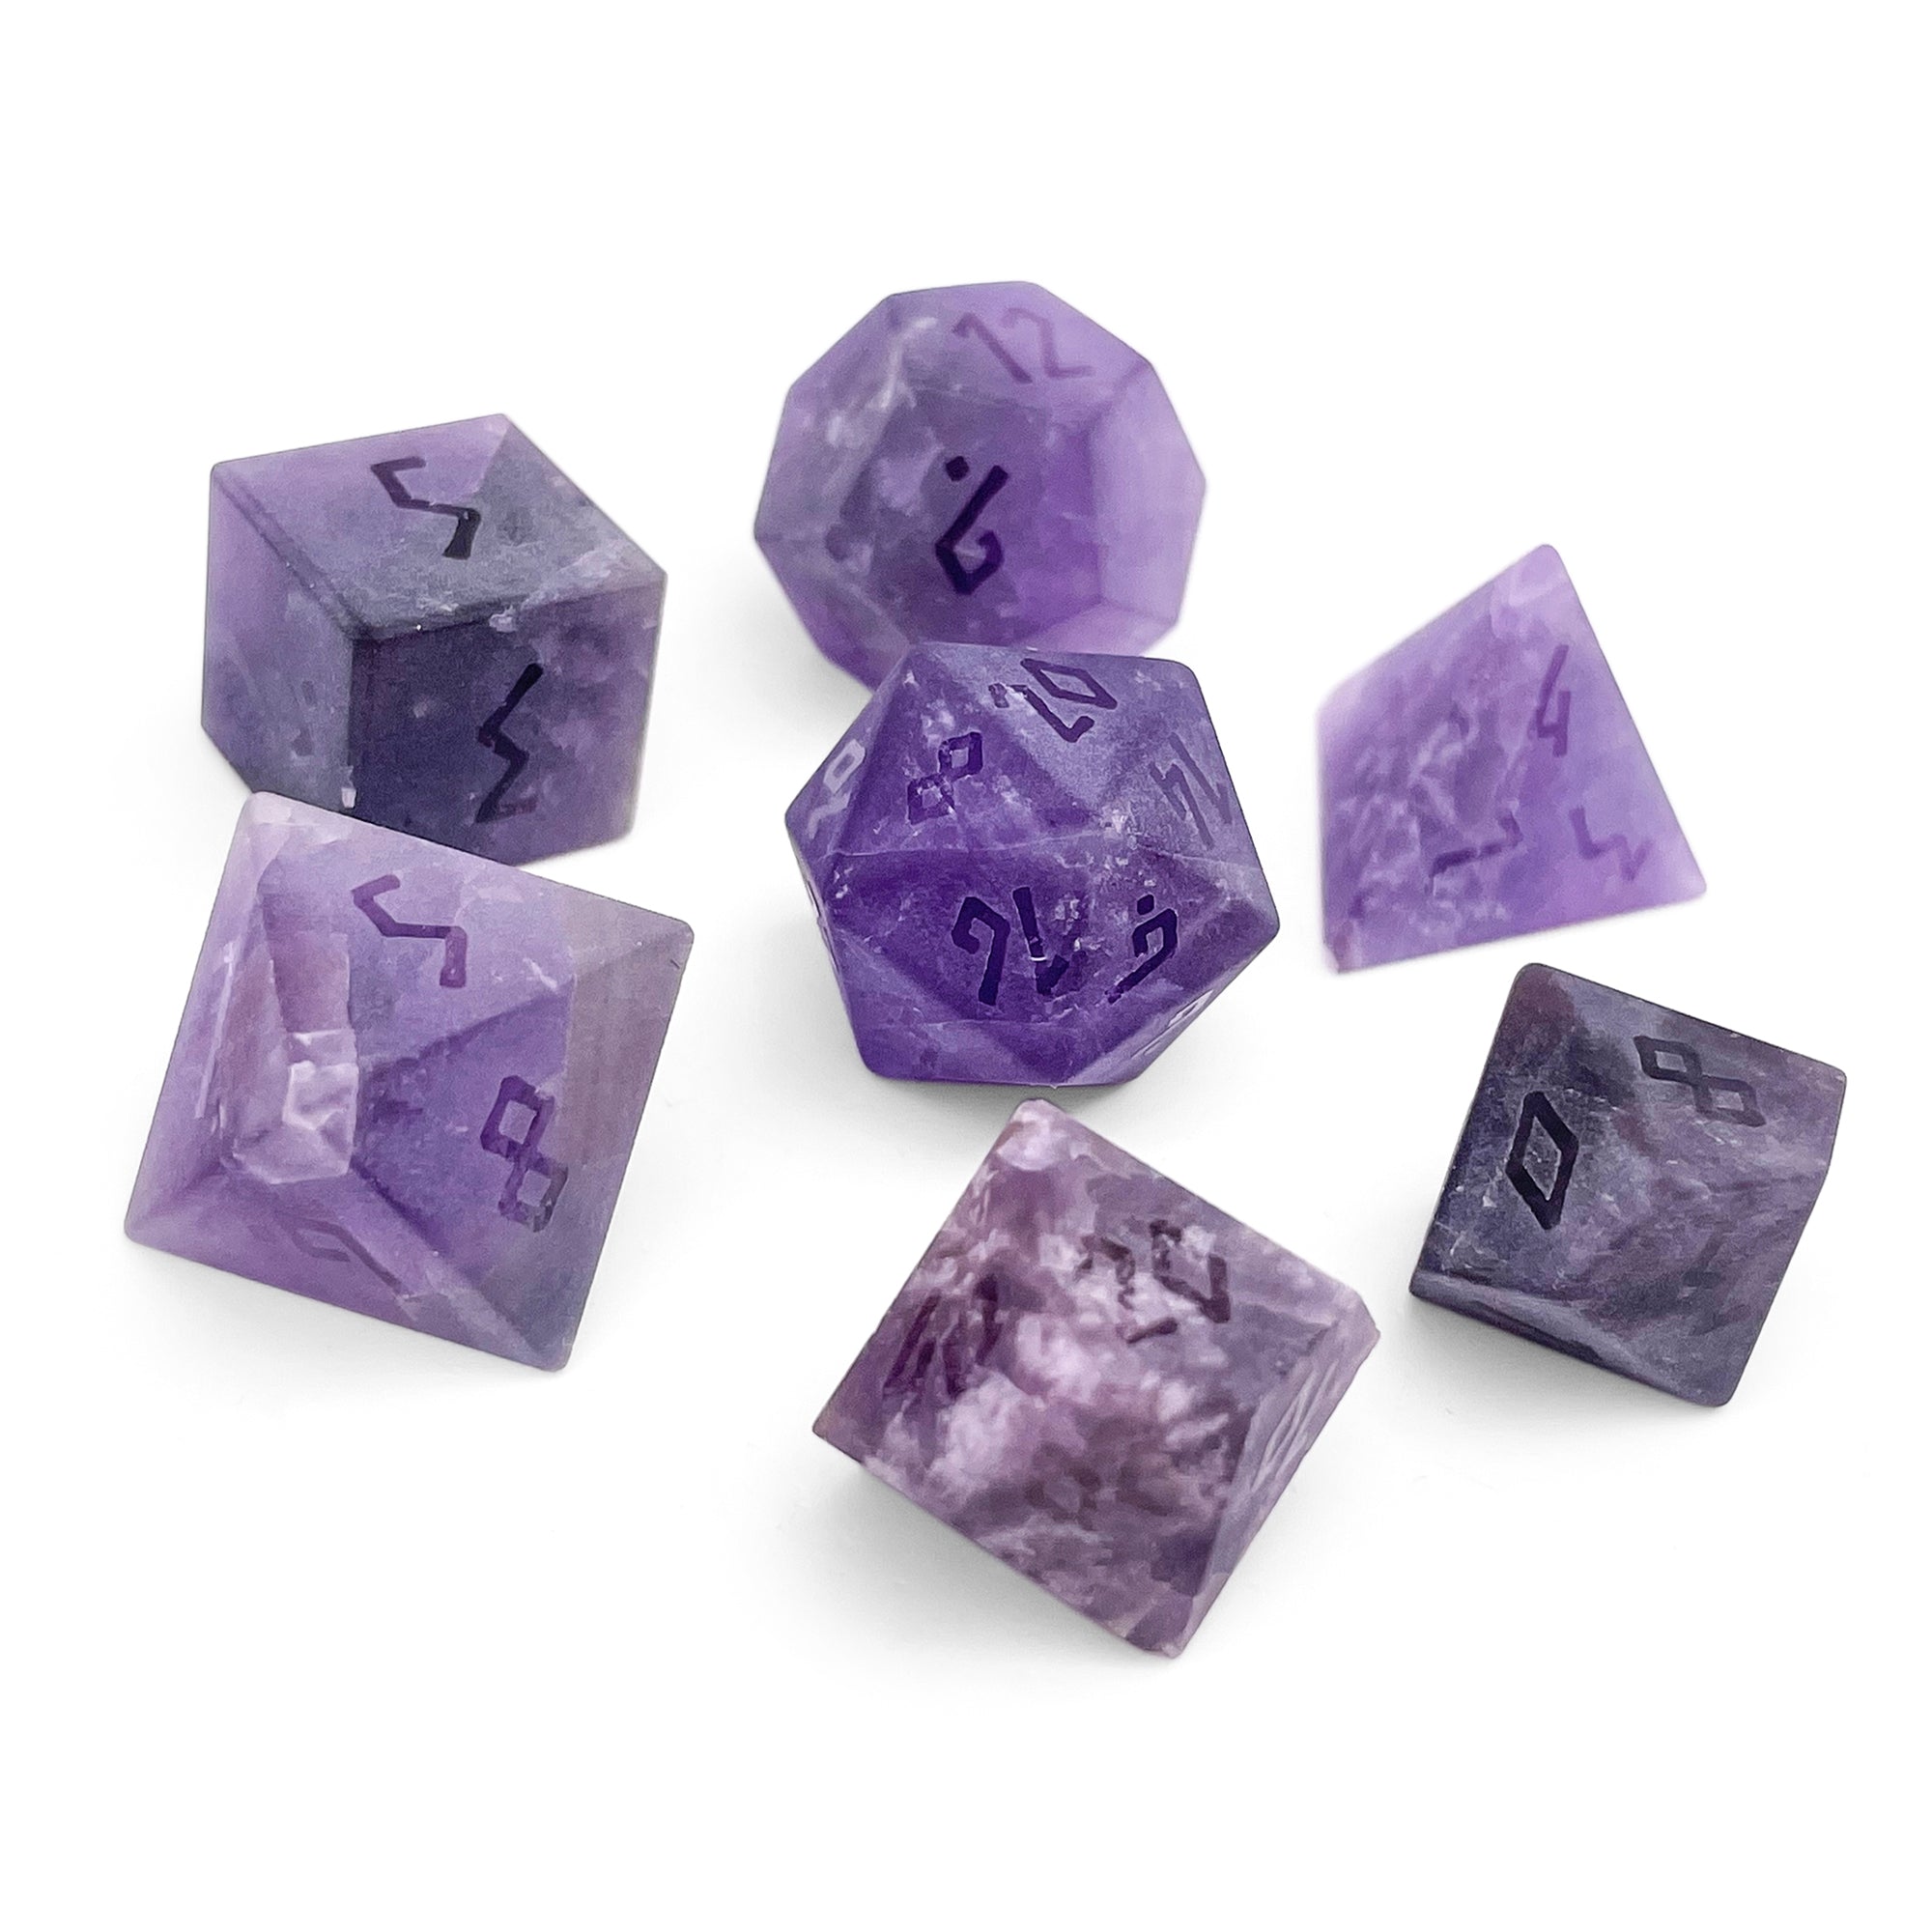 Amethyst - Frosted - Raised 7 Piece RPG Set Gemstone Dice - NOR 01029